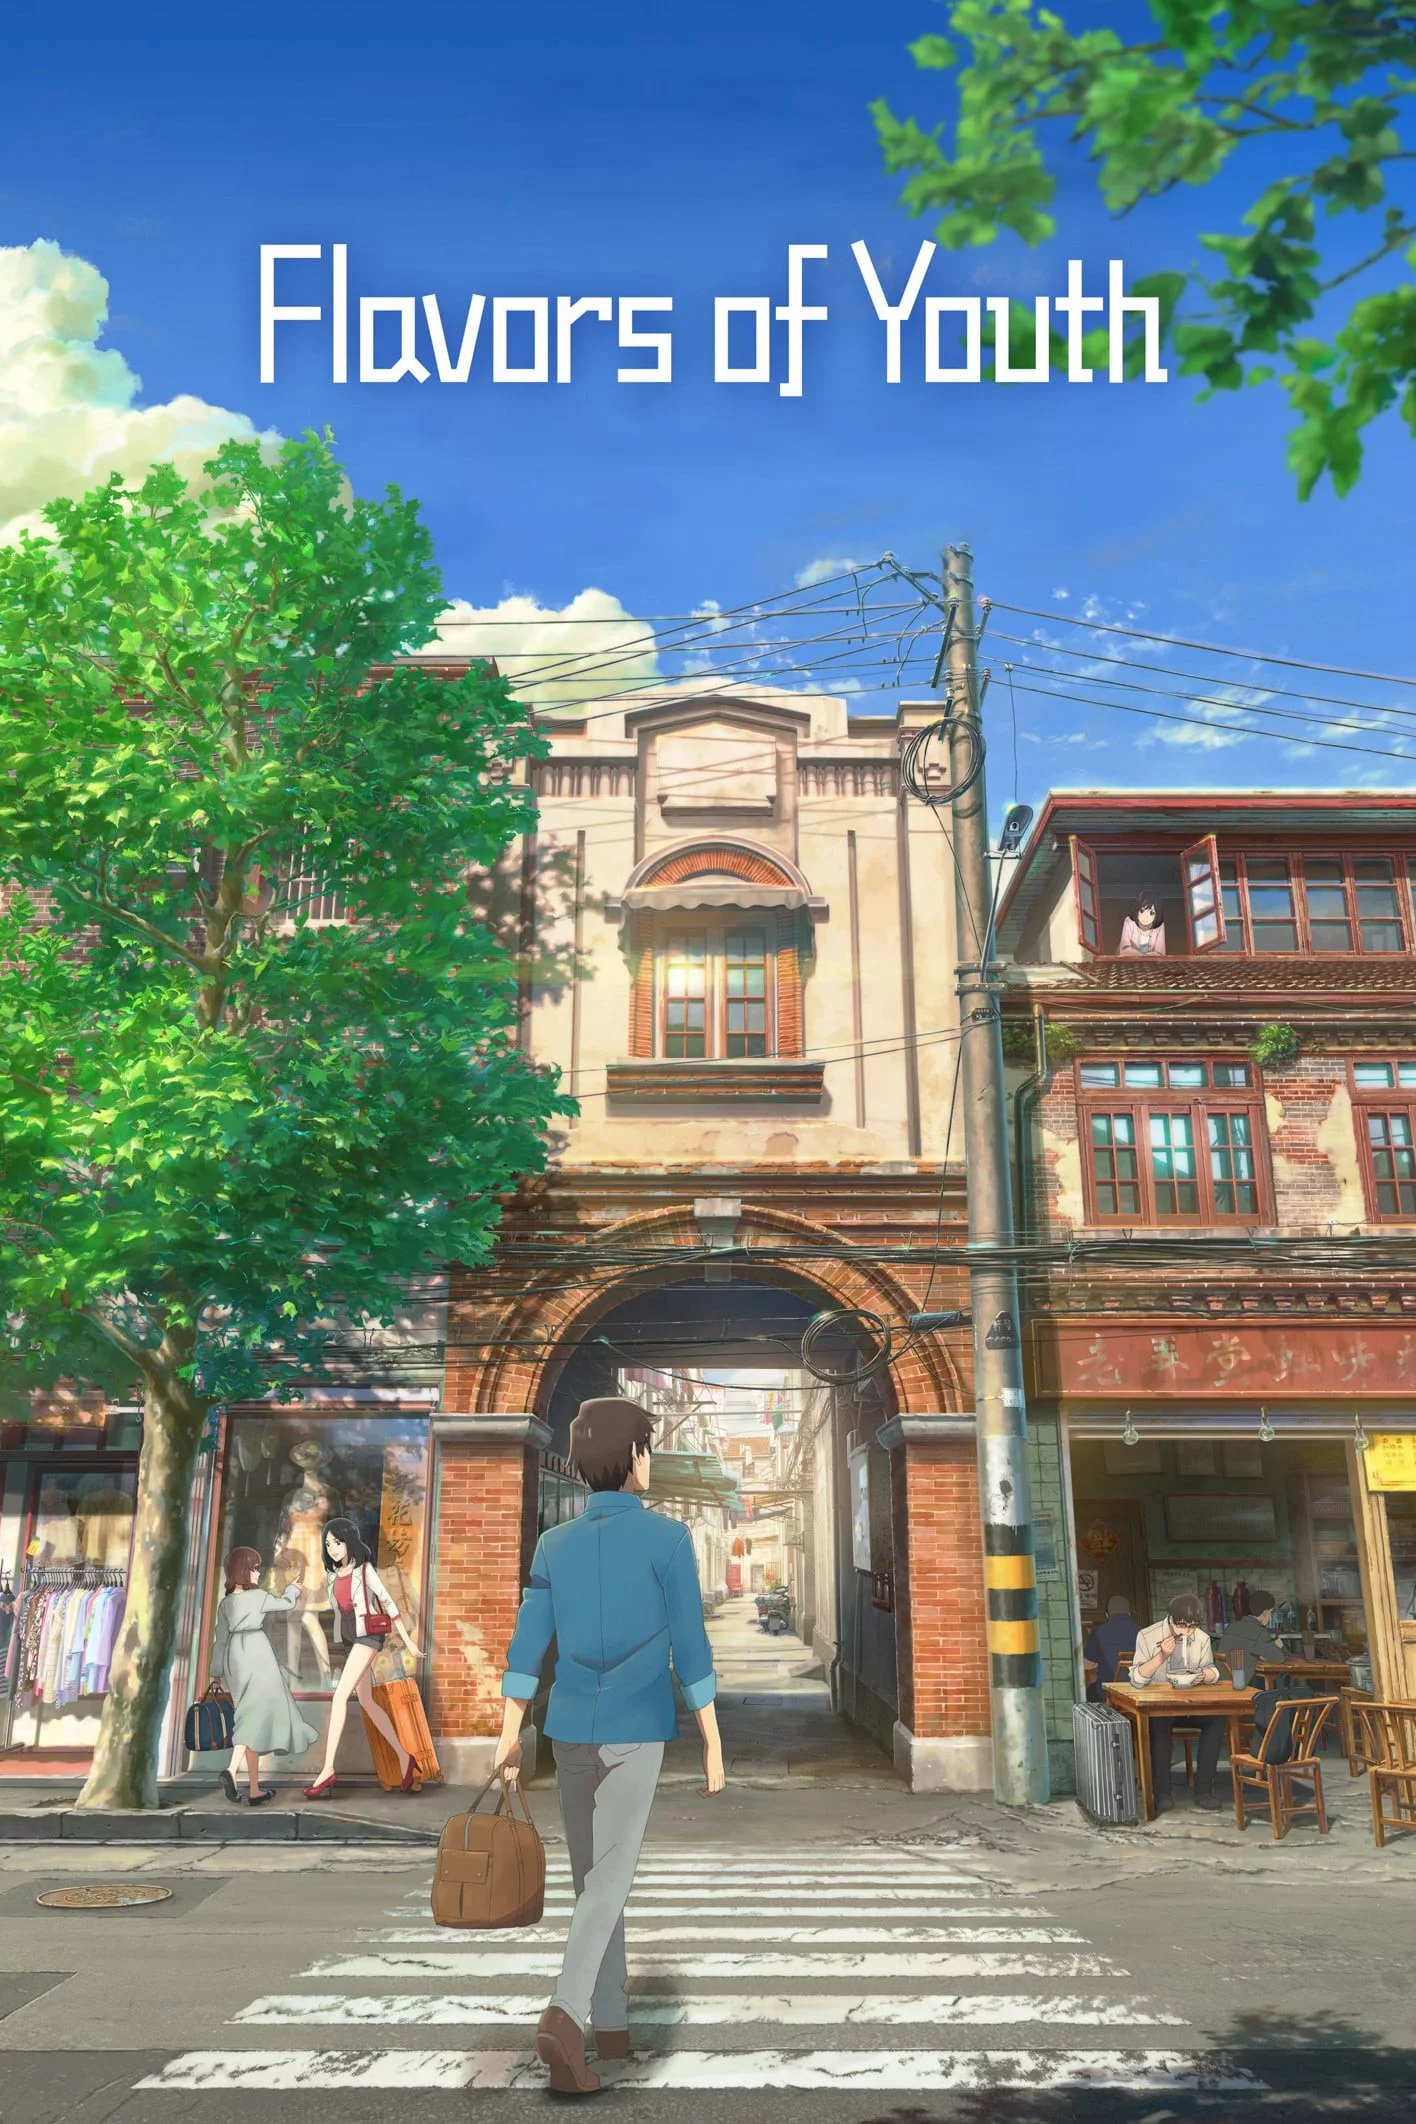 Photo 1 du film : Flavors of Youth